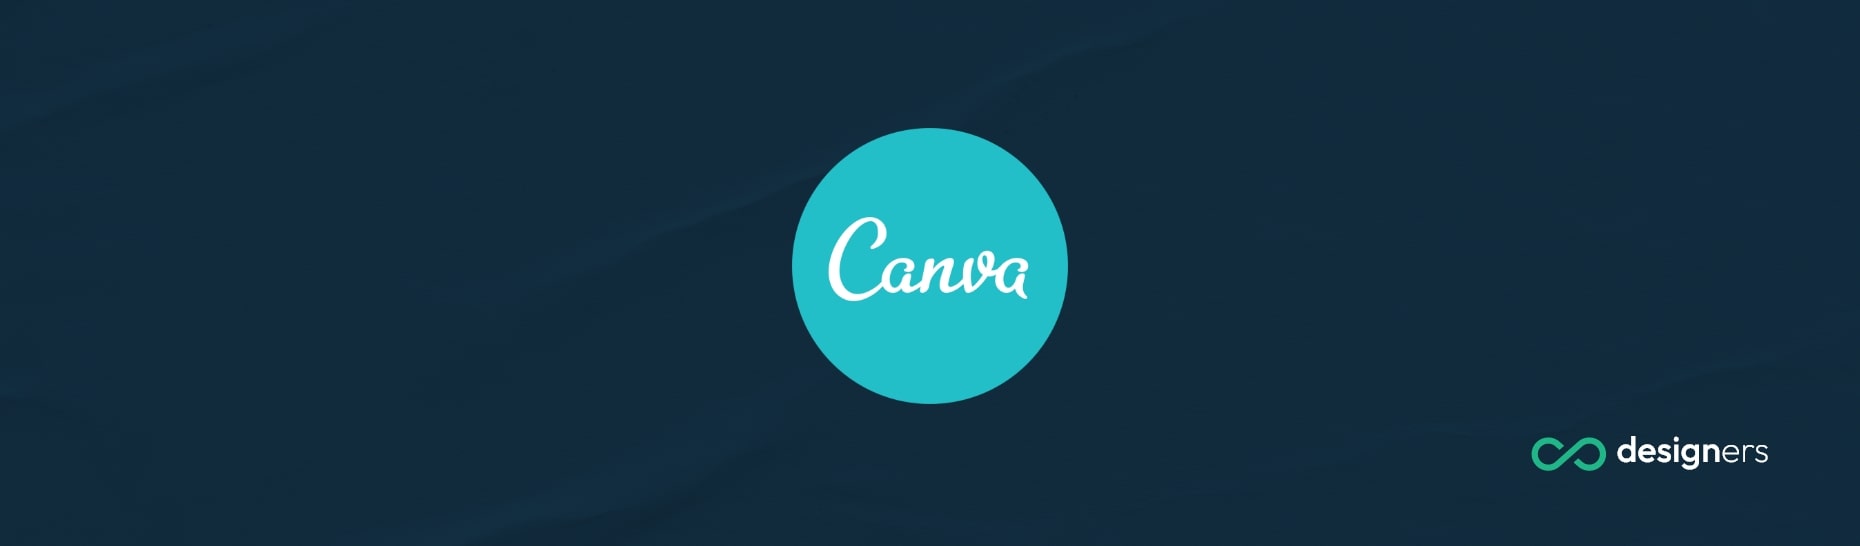 How Do I Create a Digital Planner With Links in Canva?